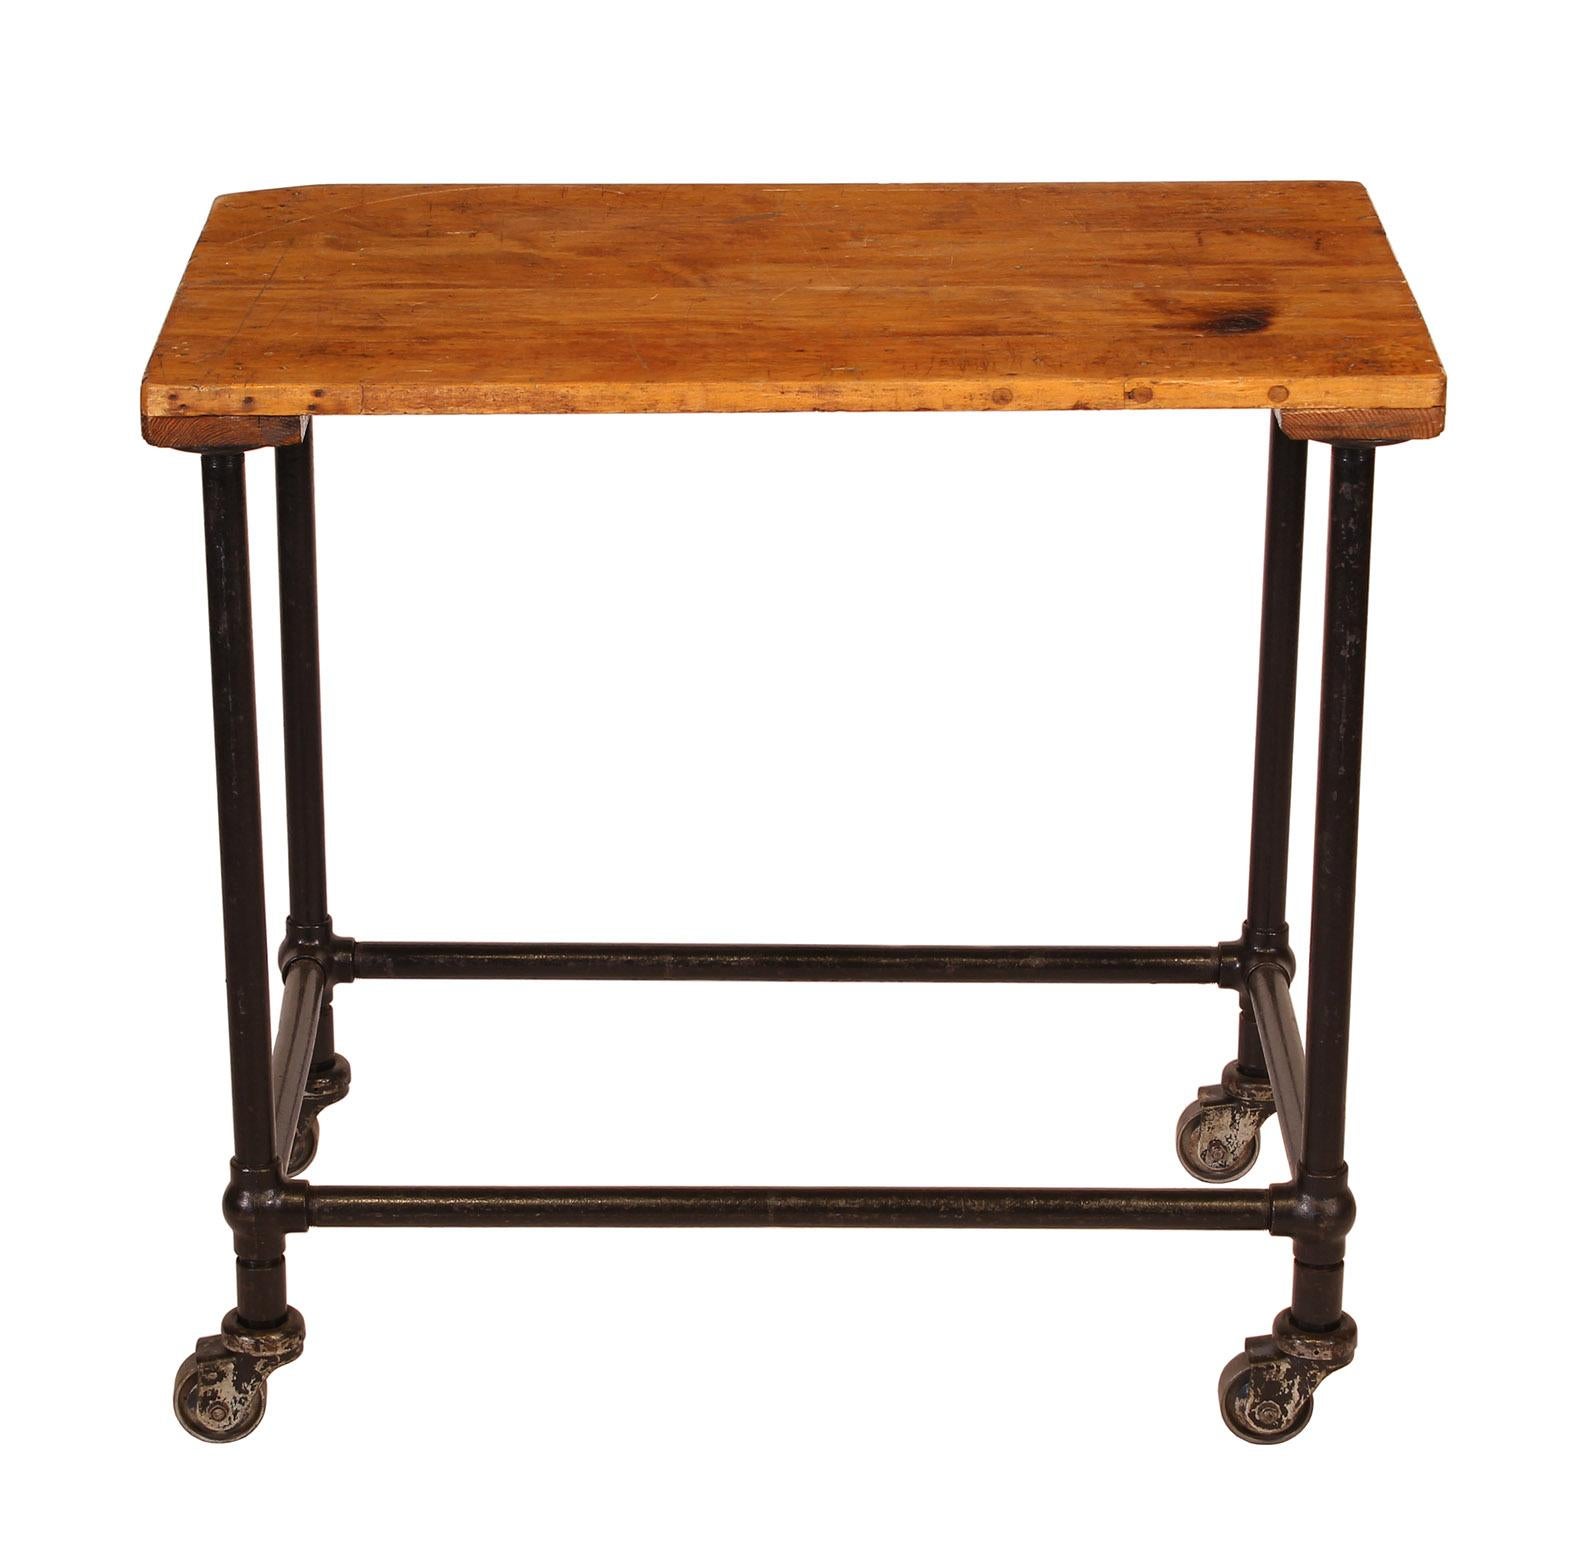 Cast Authentic Vintage Industrial Rolling Printing Table or Cart